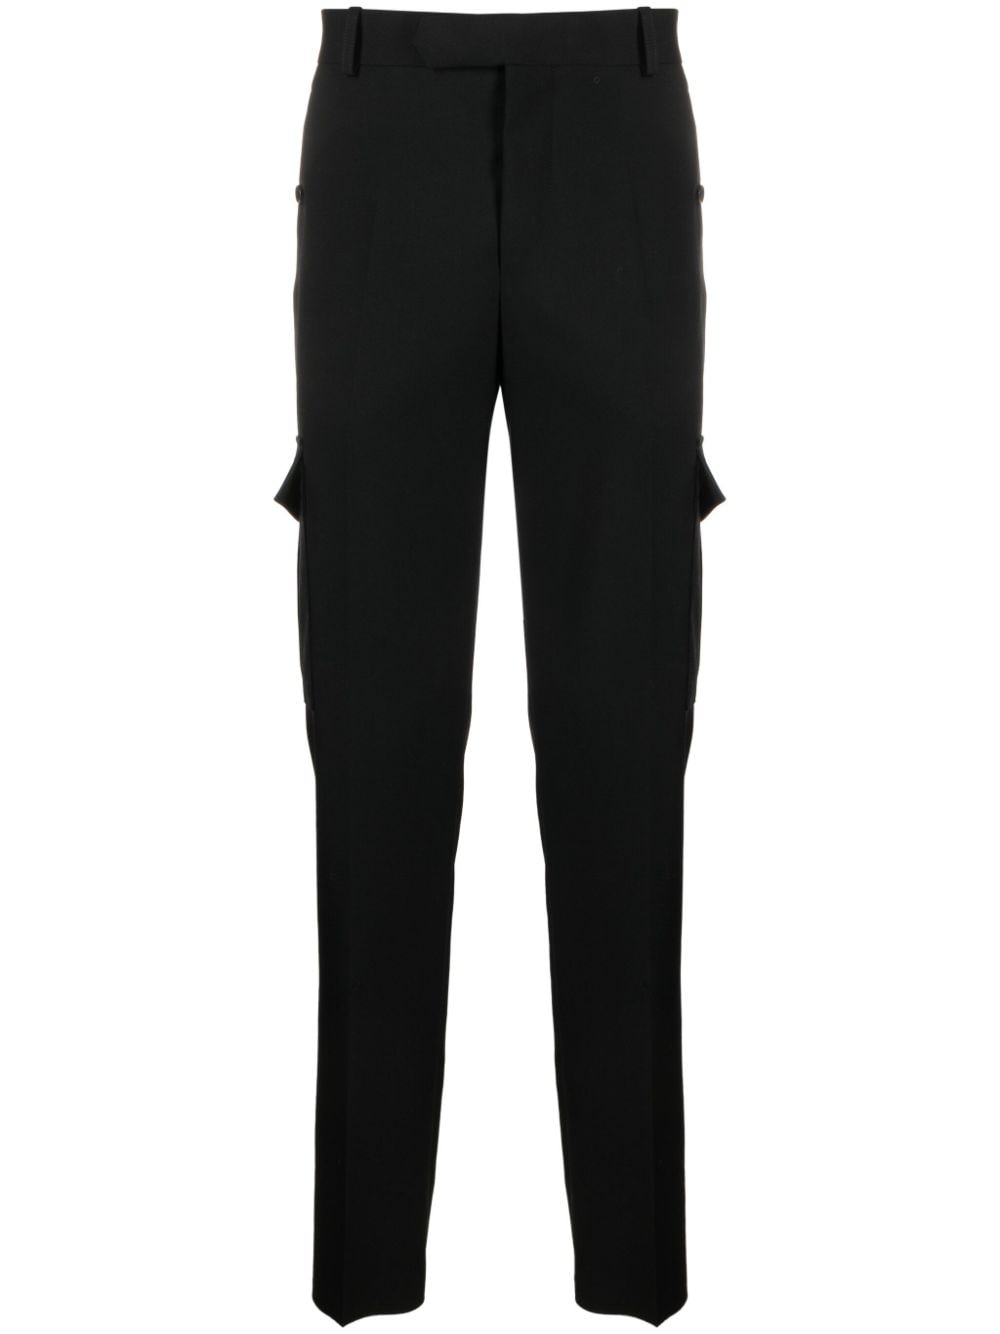 Black tailored design trousers